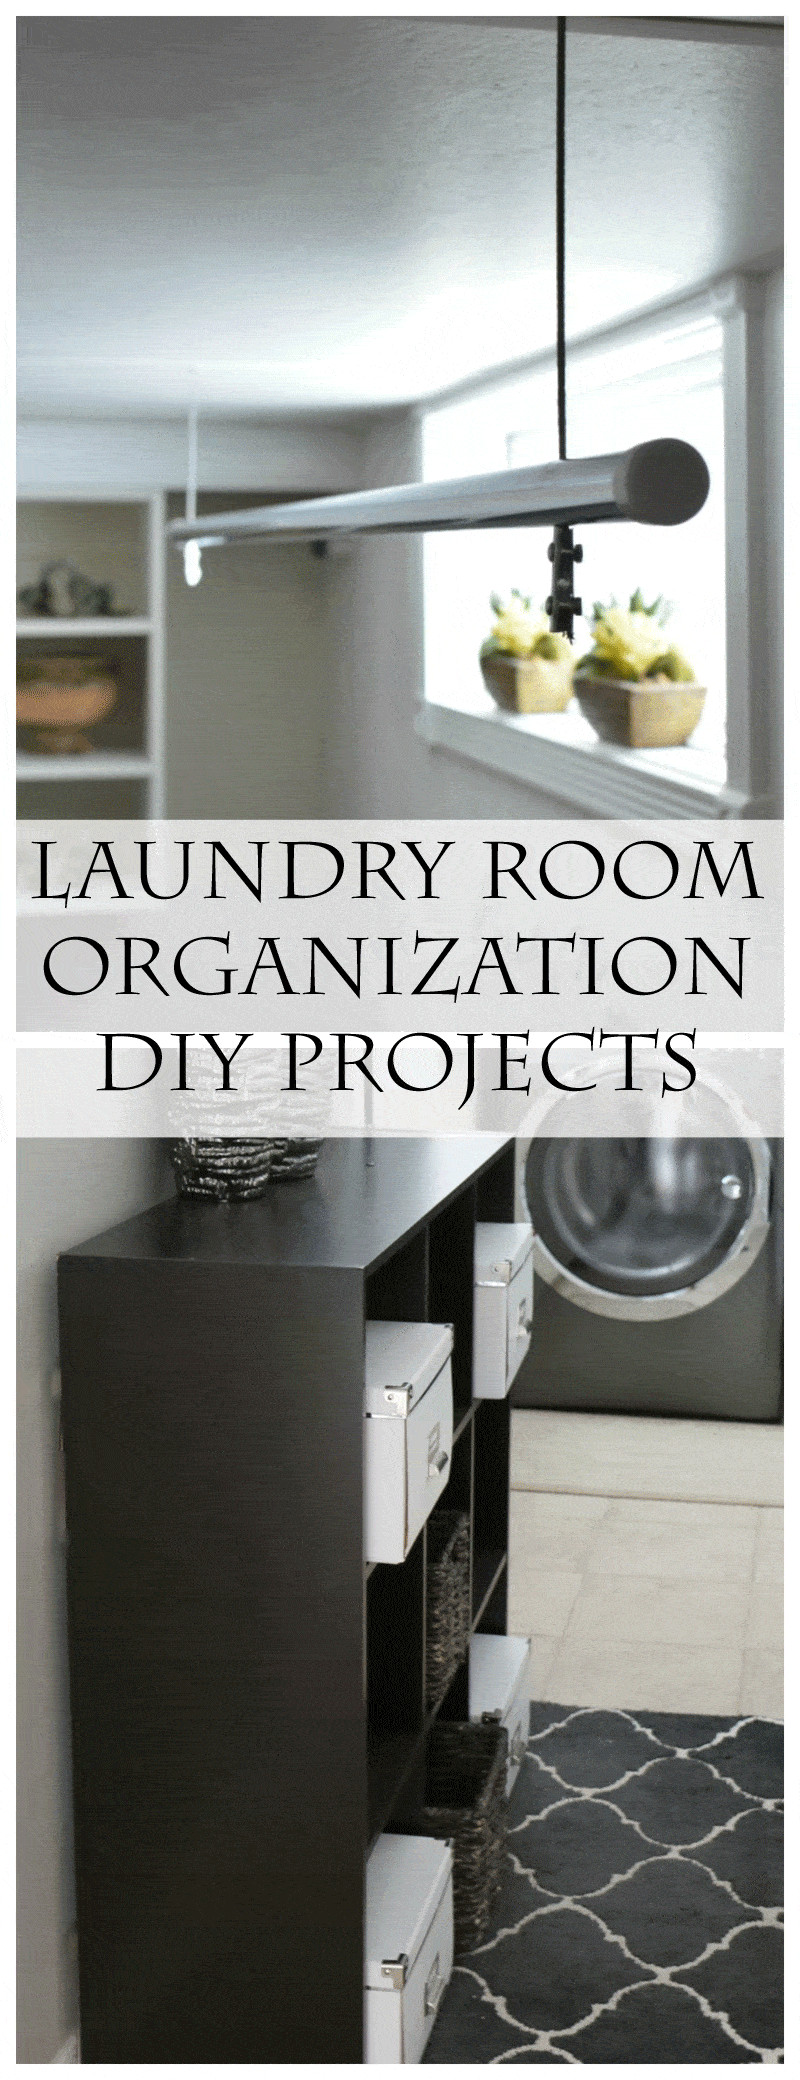 DIY Organize Room
 Laundry Room Organization in 3 Easy Steps Setting for Four